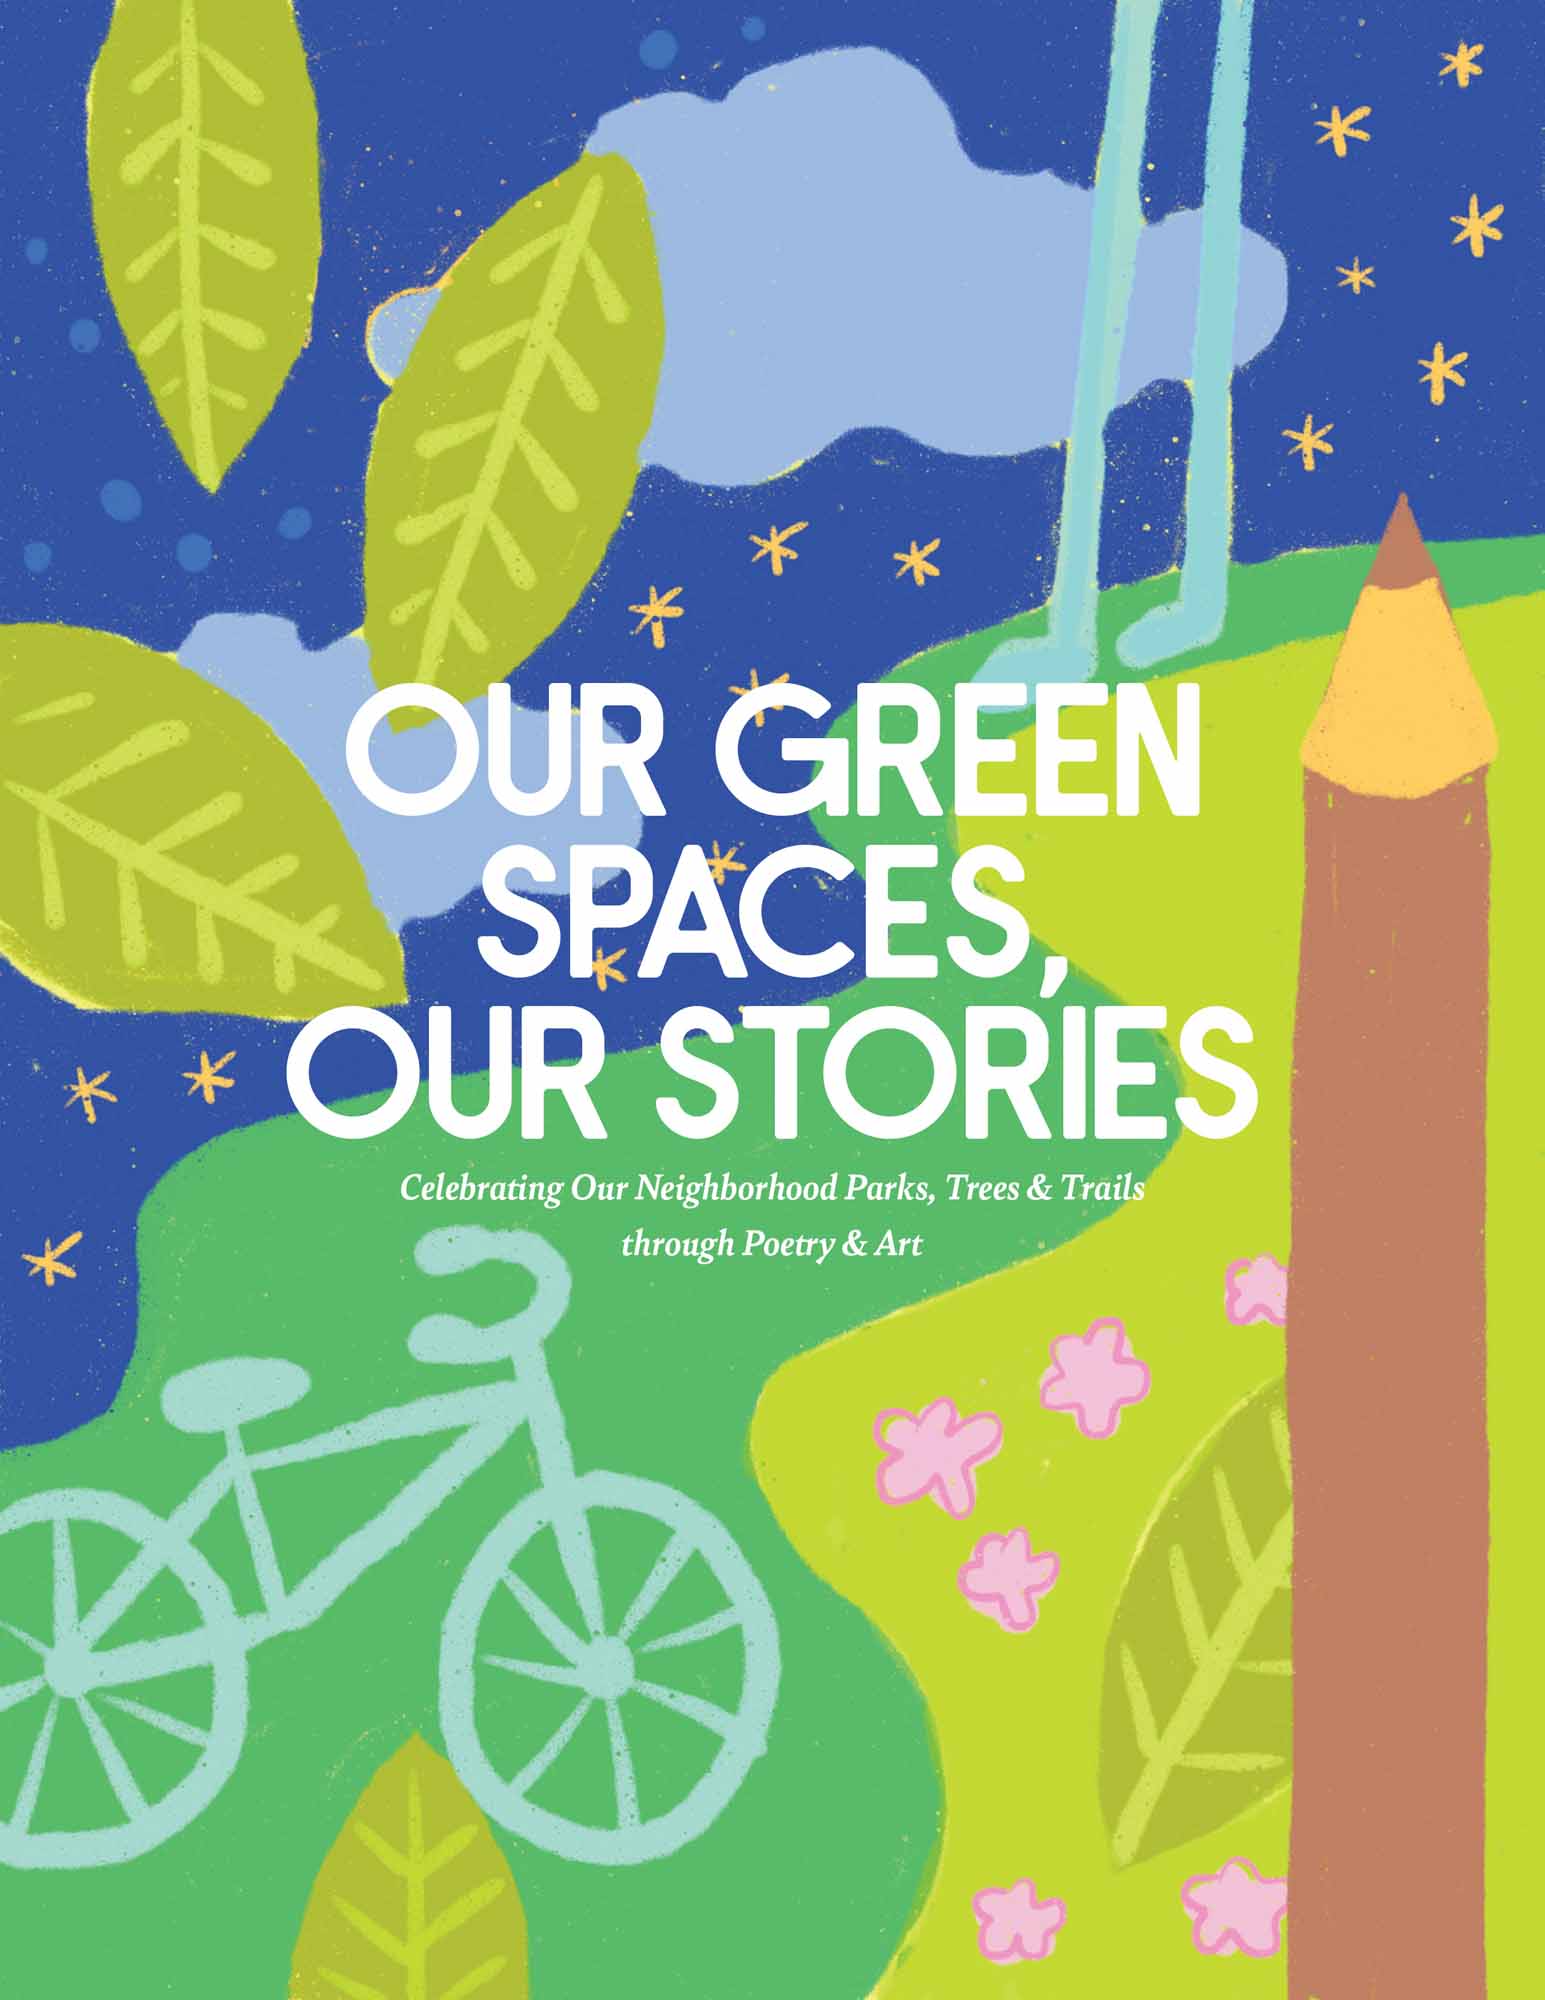 Our Green Spaces, Our Stories: Celebrating Our Neighborhood Parks, Trees & Trails Through Poetry & Art